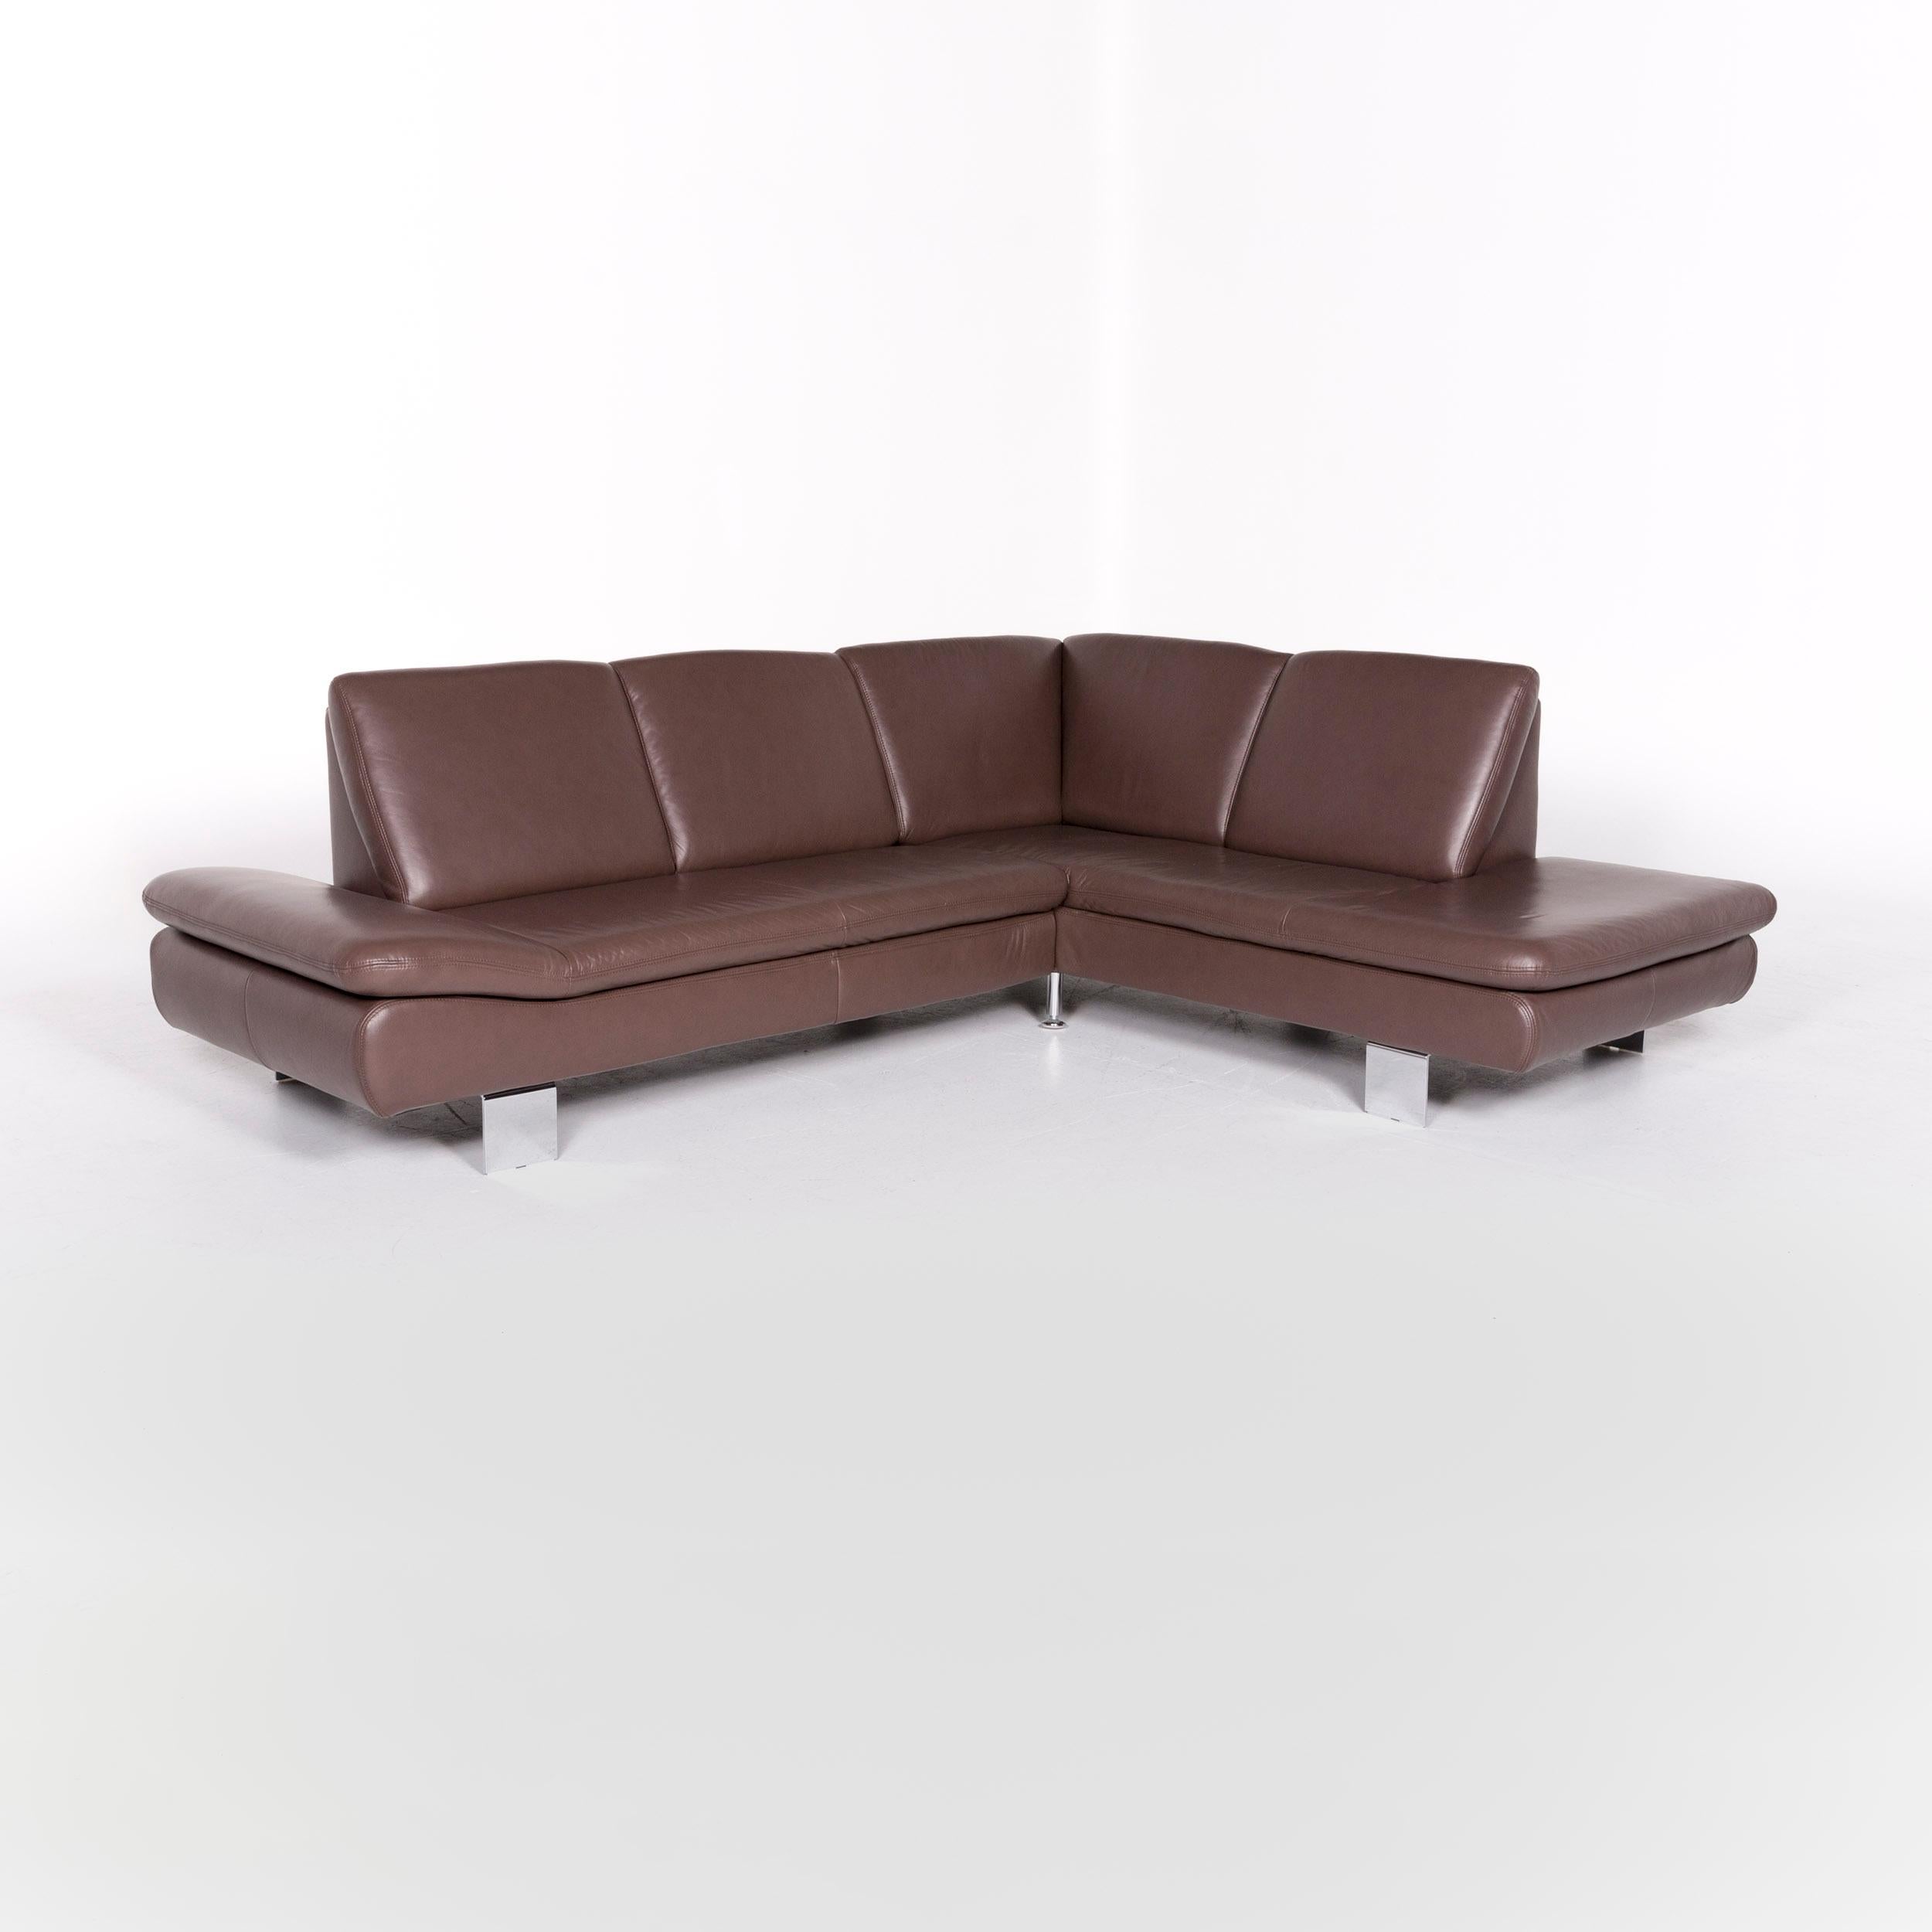 We bring to you a Willi Schillig Lucca designer leather corner sofa brown couch.

Product measurements in centimeters:

Depth 218
Width 270
Height 88
Seat-height 43
Rest-height 51
Seat-depth 54
Seat-width 187
Back-height 46.
   